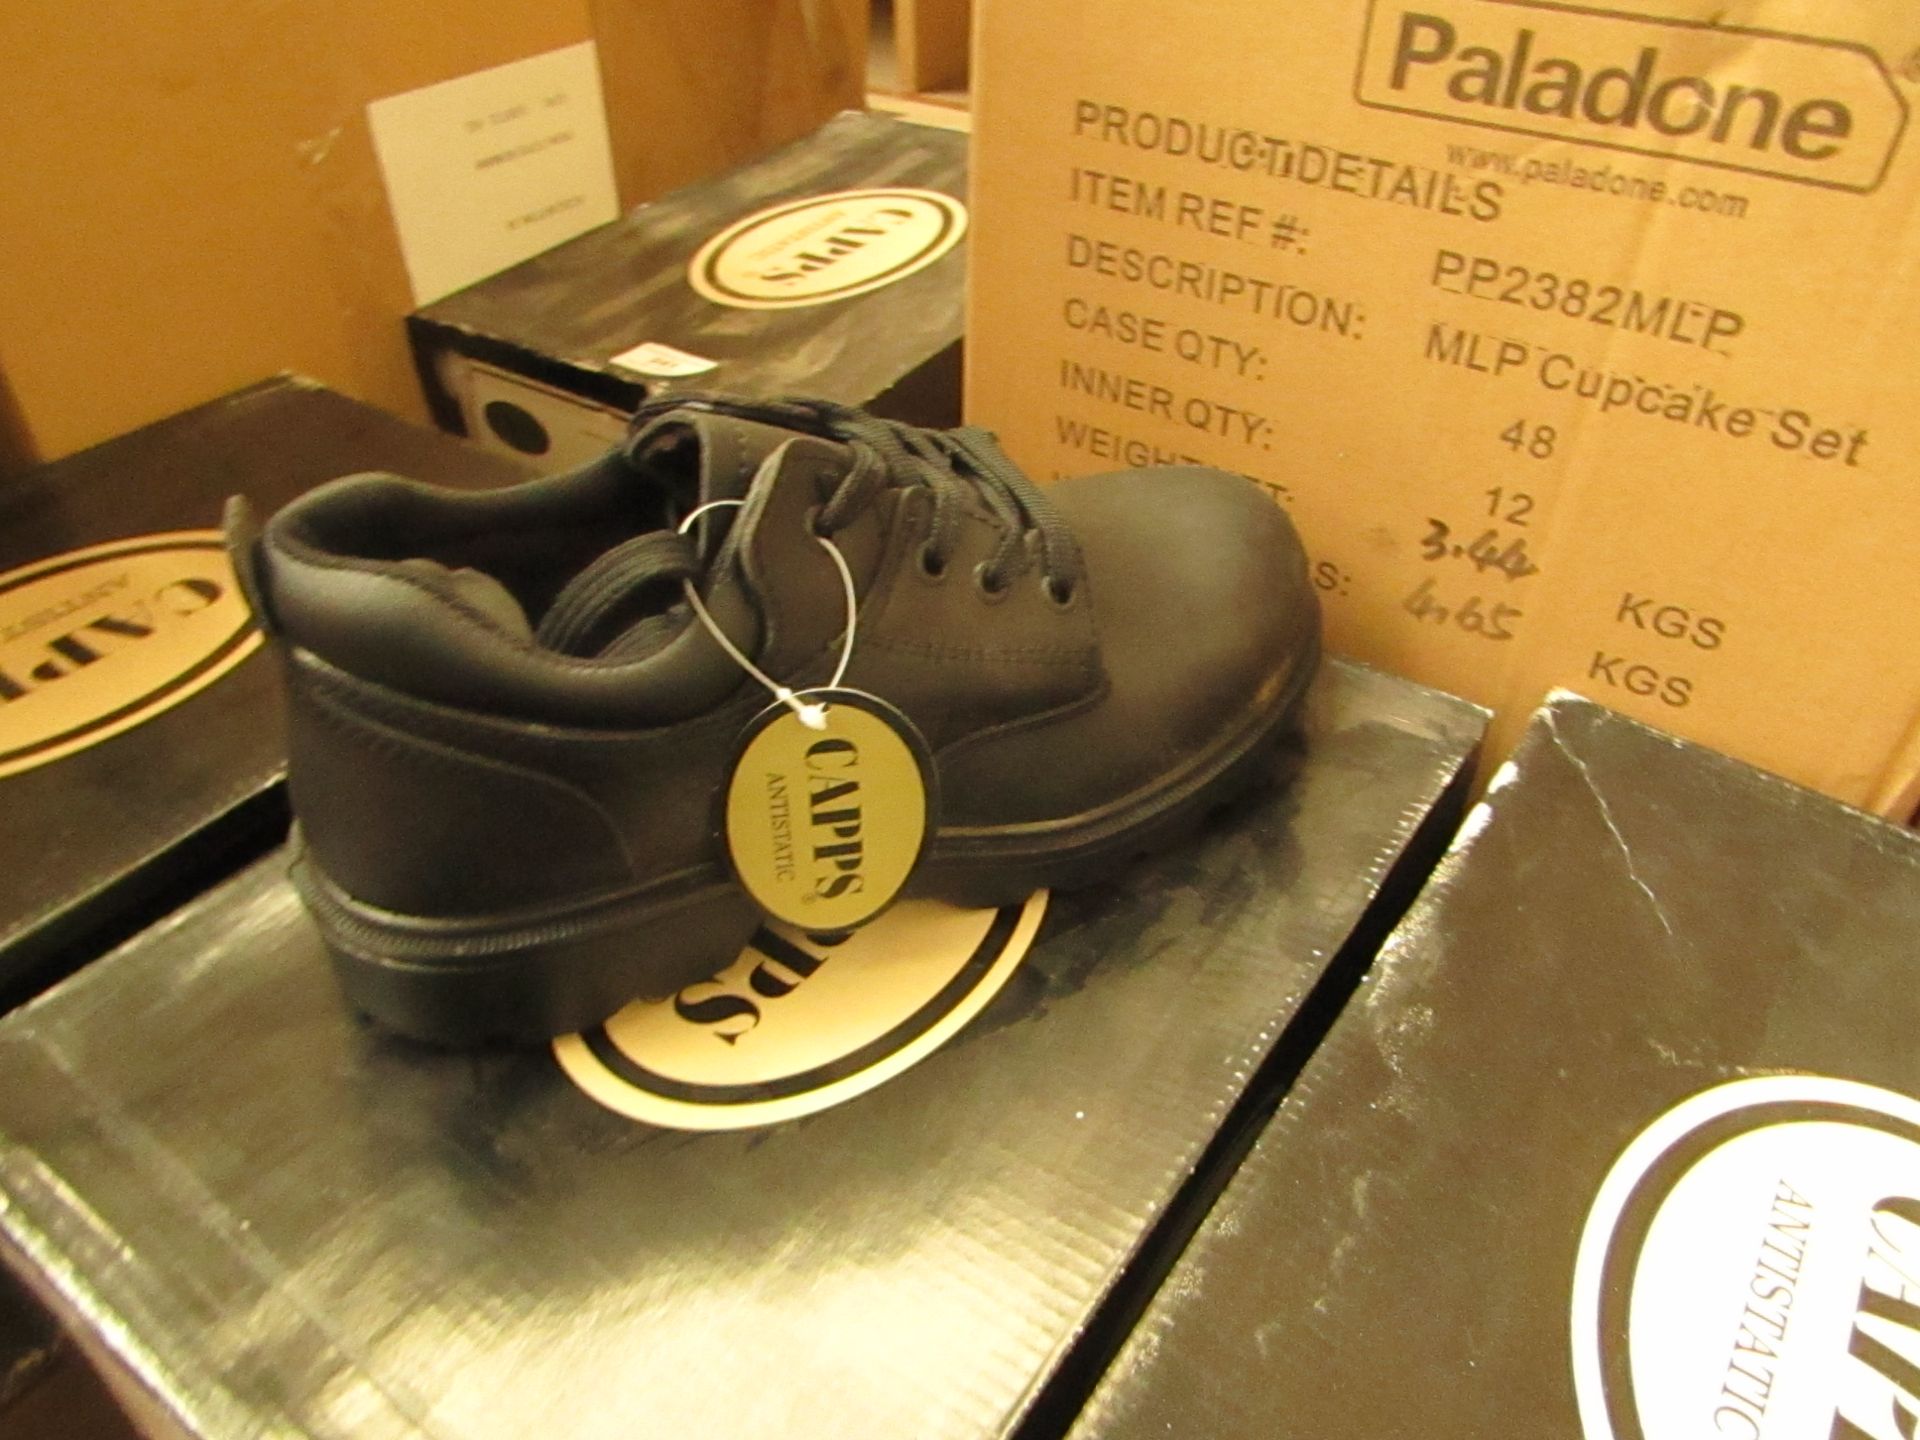 CAPPS - Black Steel Toe Cap Shoes - Size 4 - Boxed.